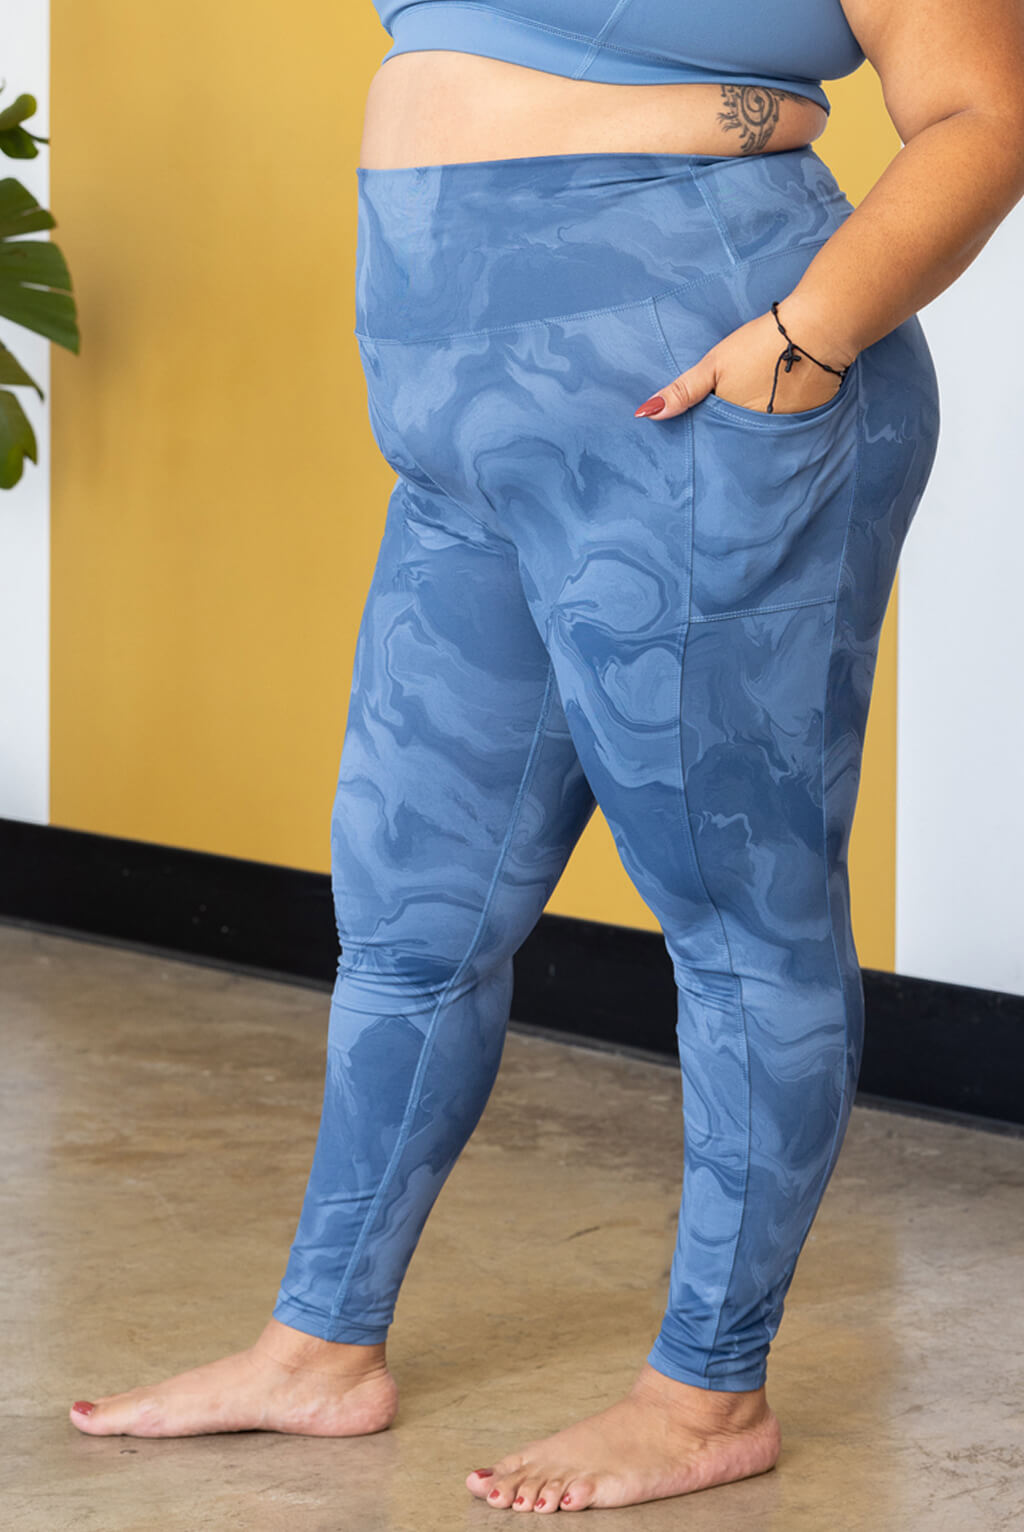 plus size leggings with pockets, colorful prints